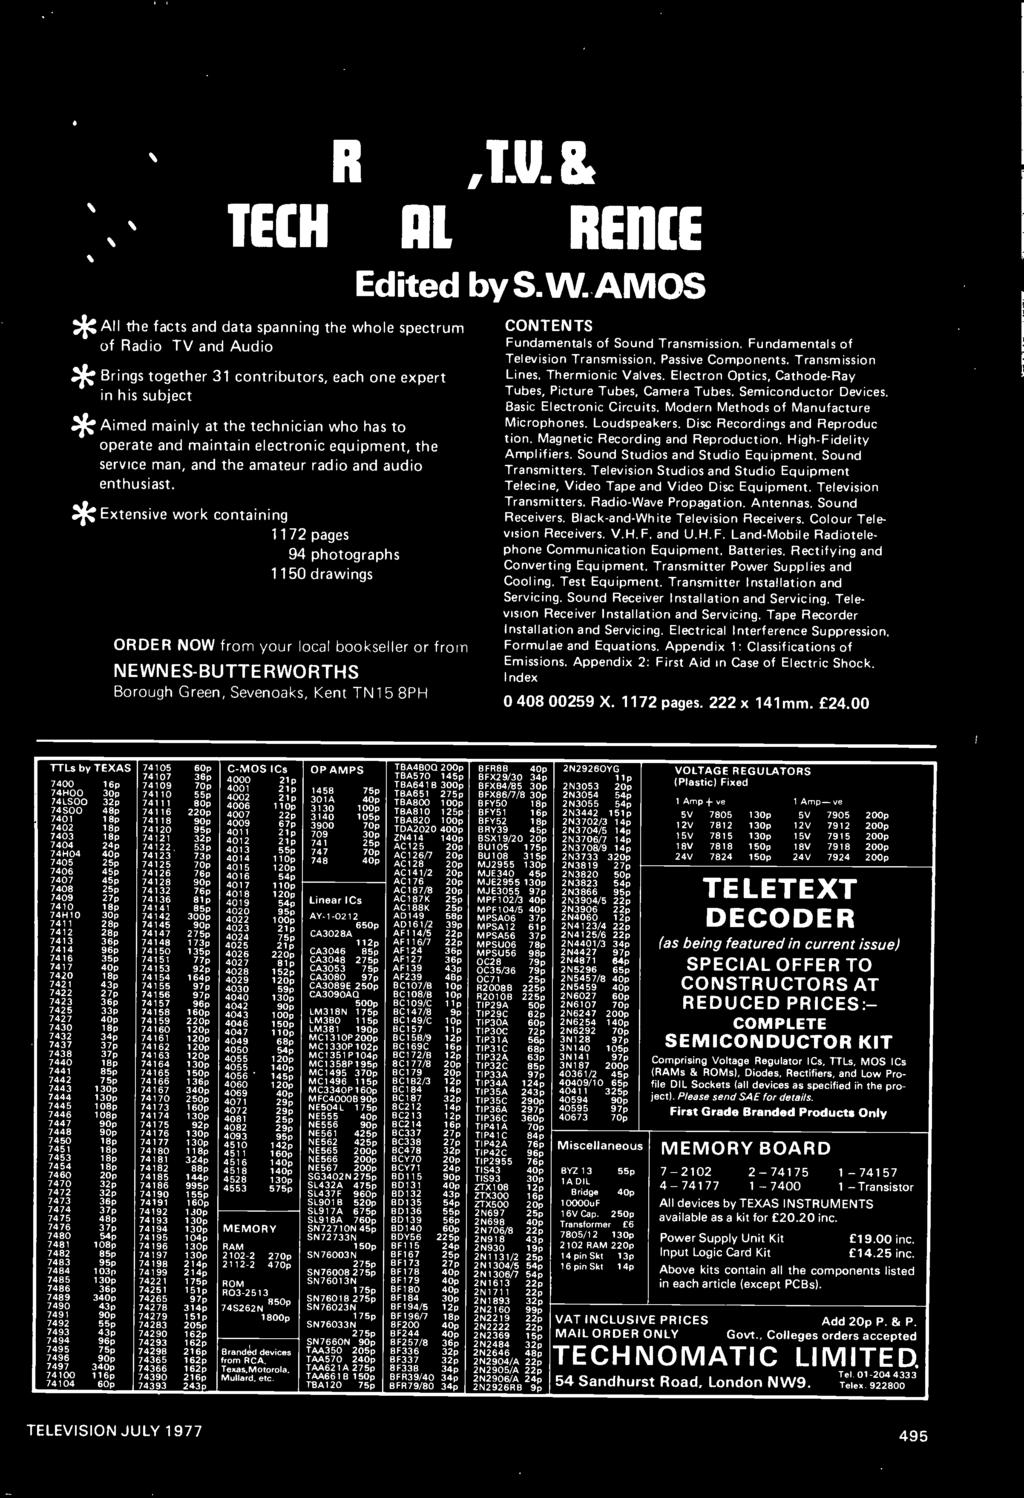 . RADIO,T1L &AUDIO TECHNICAL REFERENCE BOOK Edited by S. W. AMOS *All the facts and data spanning the whole spectrum of Radio, TV and Audio.